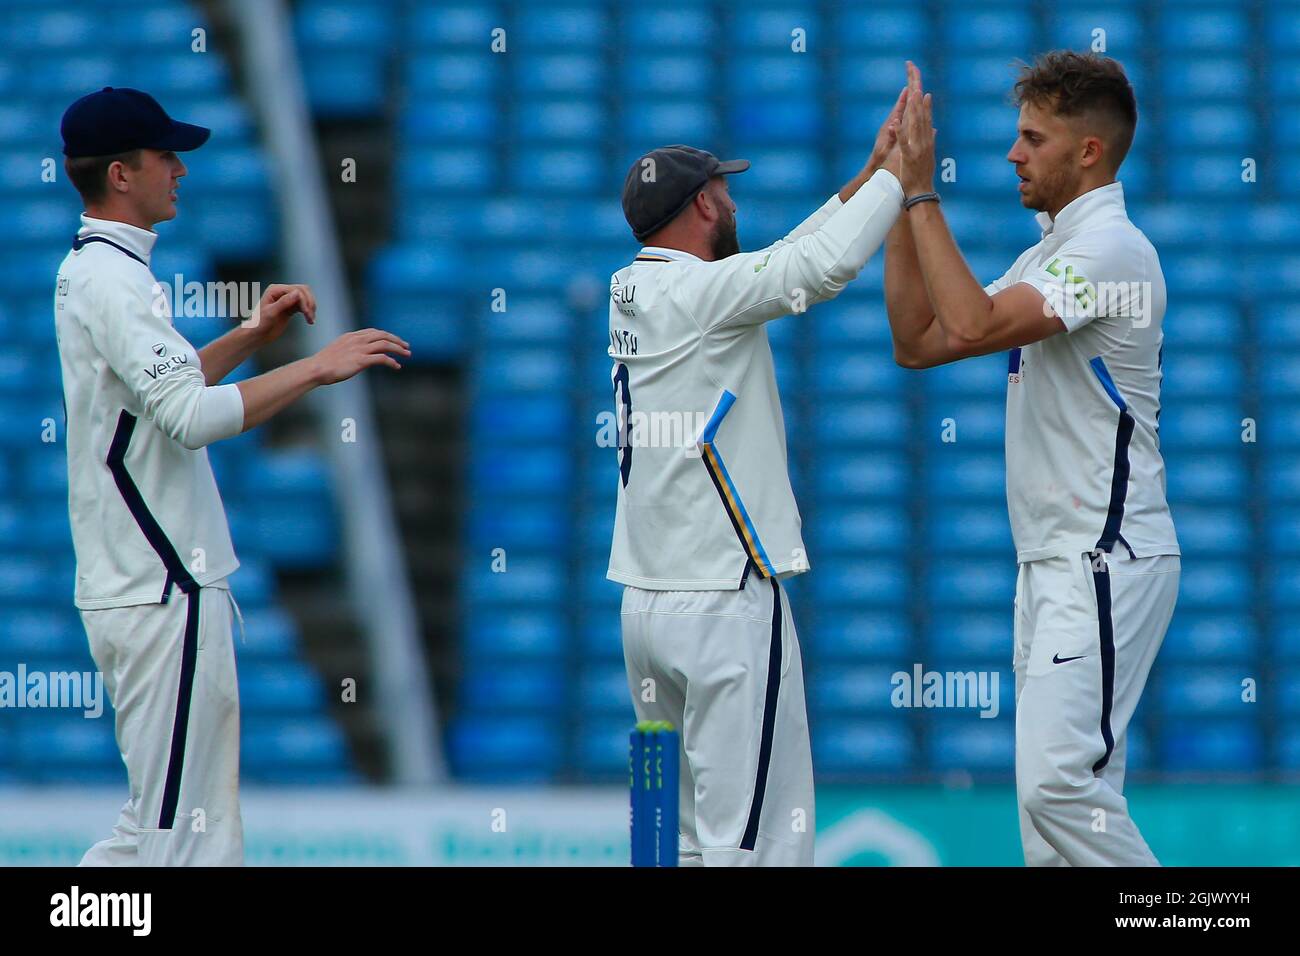 Leeds, UK. 12th Sep, 2021. Yorkshire County Cricket, Emerald Headingley Stadium, Leeds, West Yorkshire, 12th September 2021. LV= Insurance County ChampionshipÕs Division One - Yorkshire County Cricket Club vs Warwickshire CCC Day 1. Ben Coad (R) of Yorkshire County Cricket Club celebrates taking the wicket of Will Rhodes of Warwickshire CCC caught by Harry Duke. Credit: Touchlinepics/Alamy Live News Stock Photo